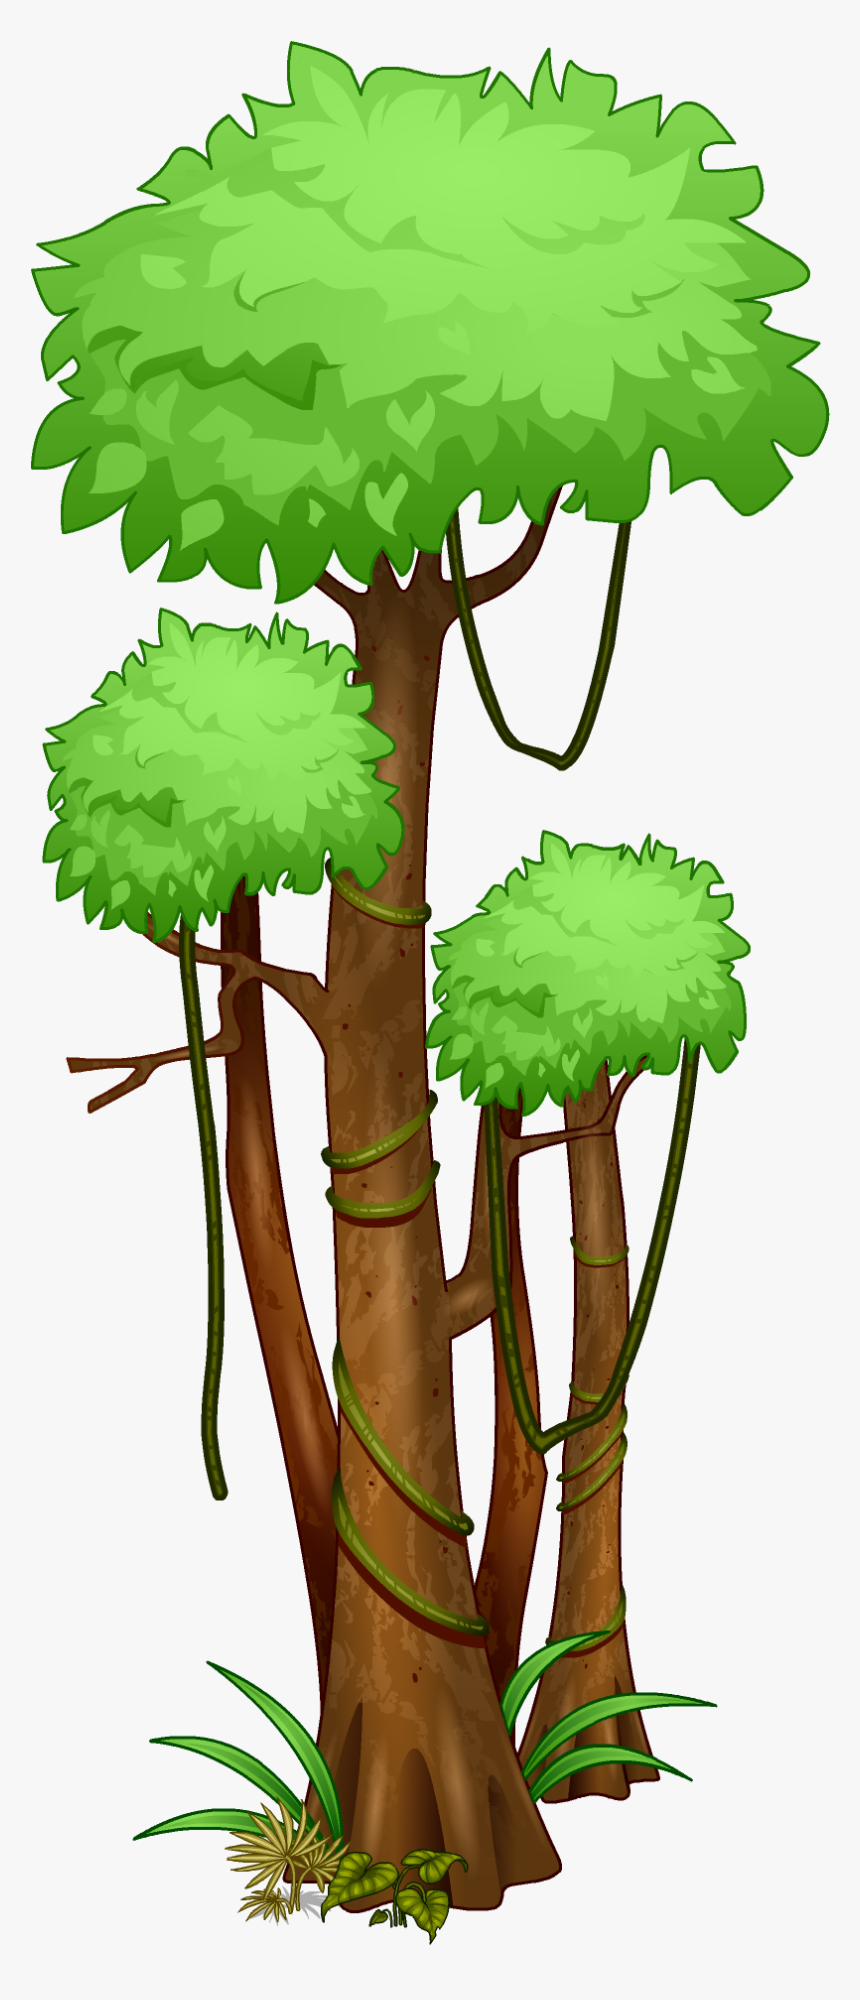 Amazon Rainforest Png Pic - Amazon Rainforest Tree Drawing, Transparent Png, Free Download